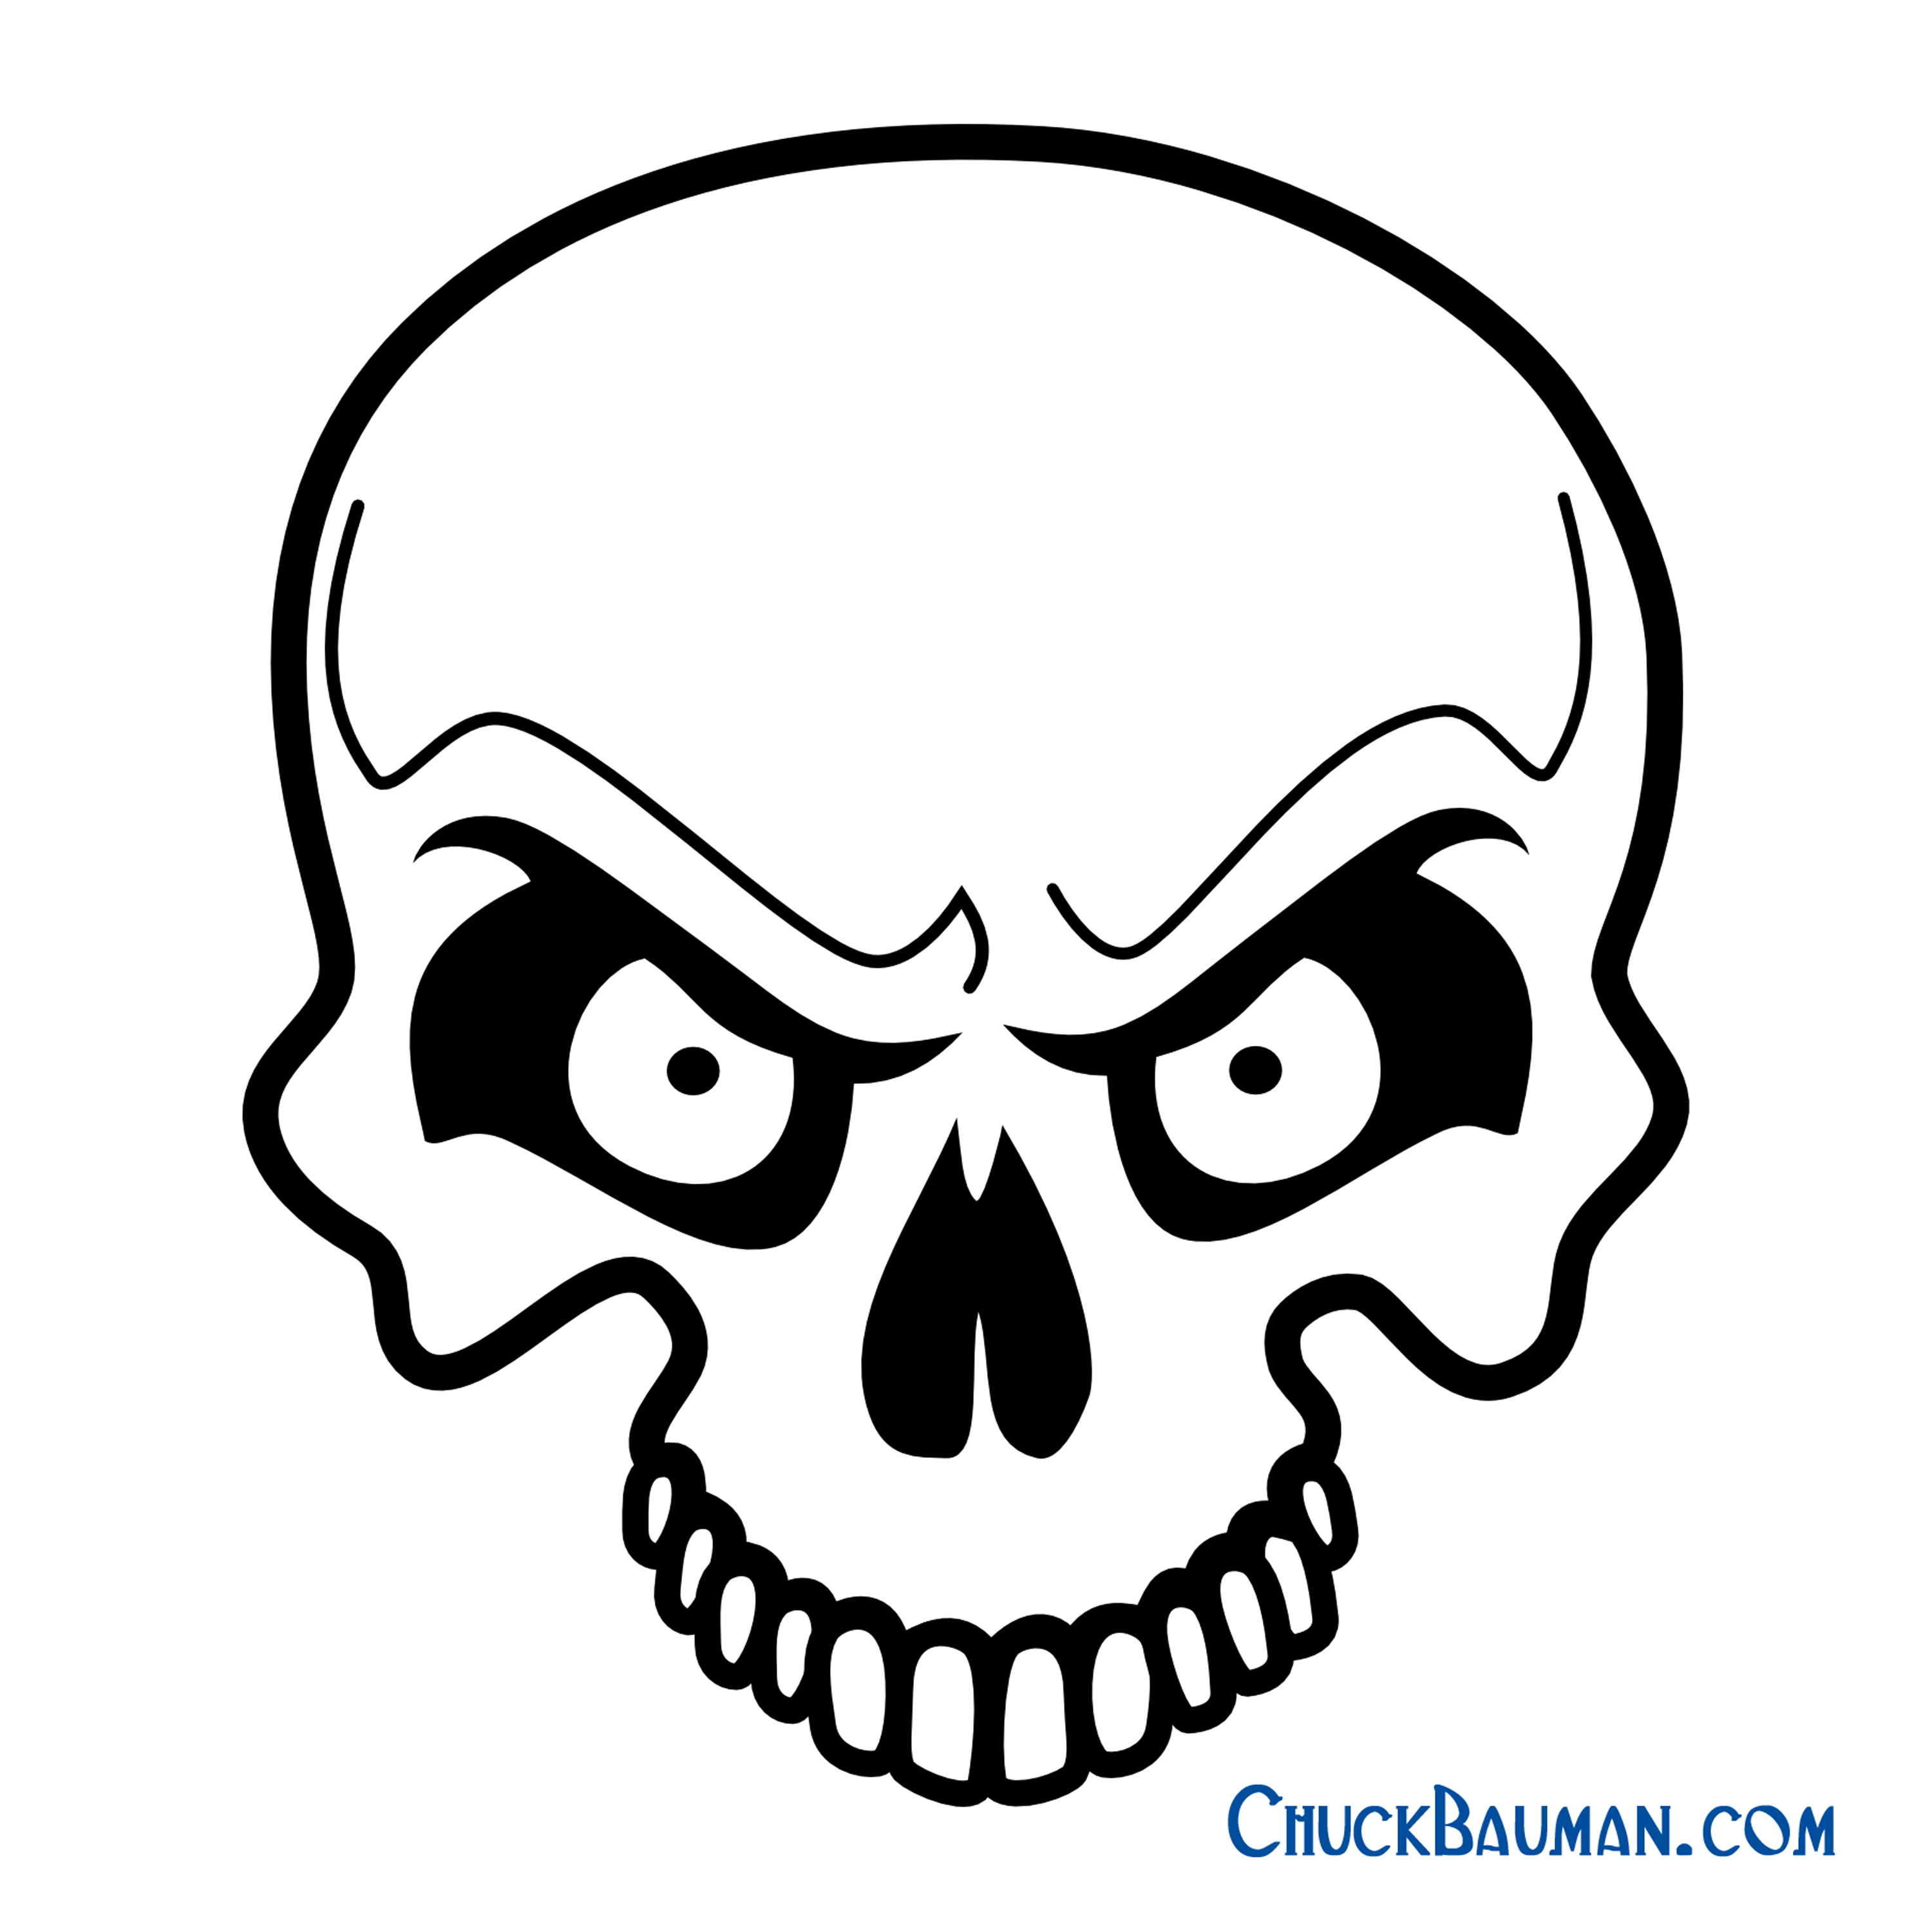 Free Printable Airbrush Skull Stencils Printable Form, Templates and